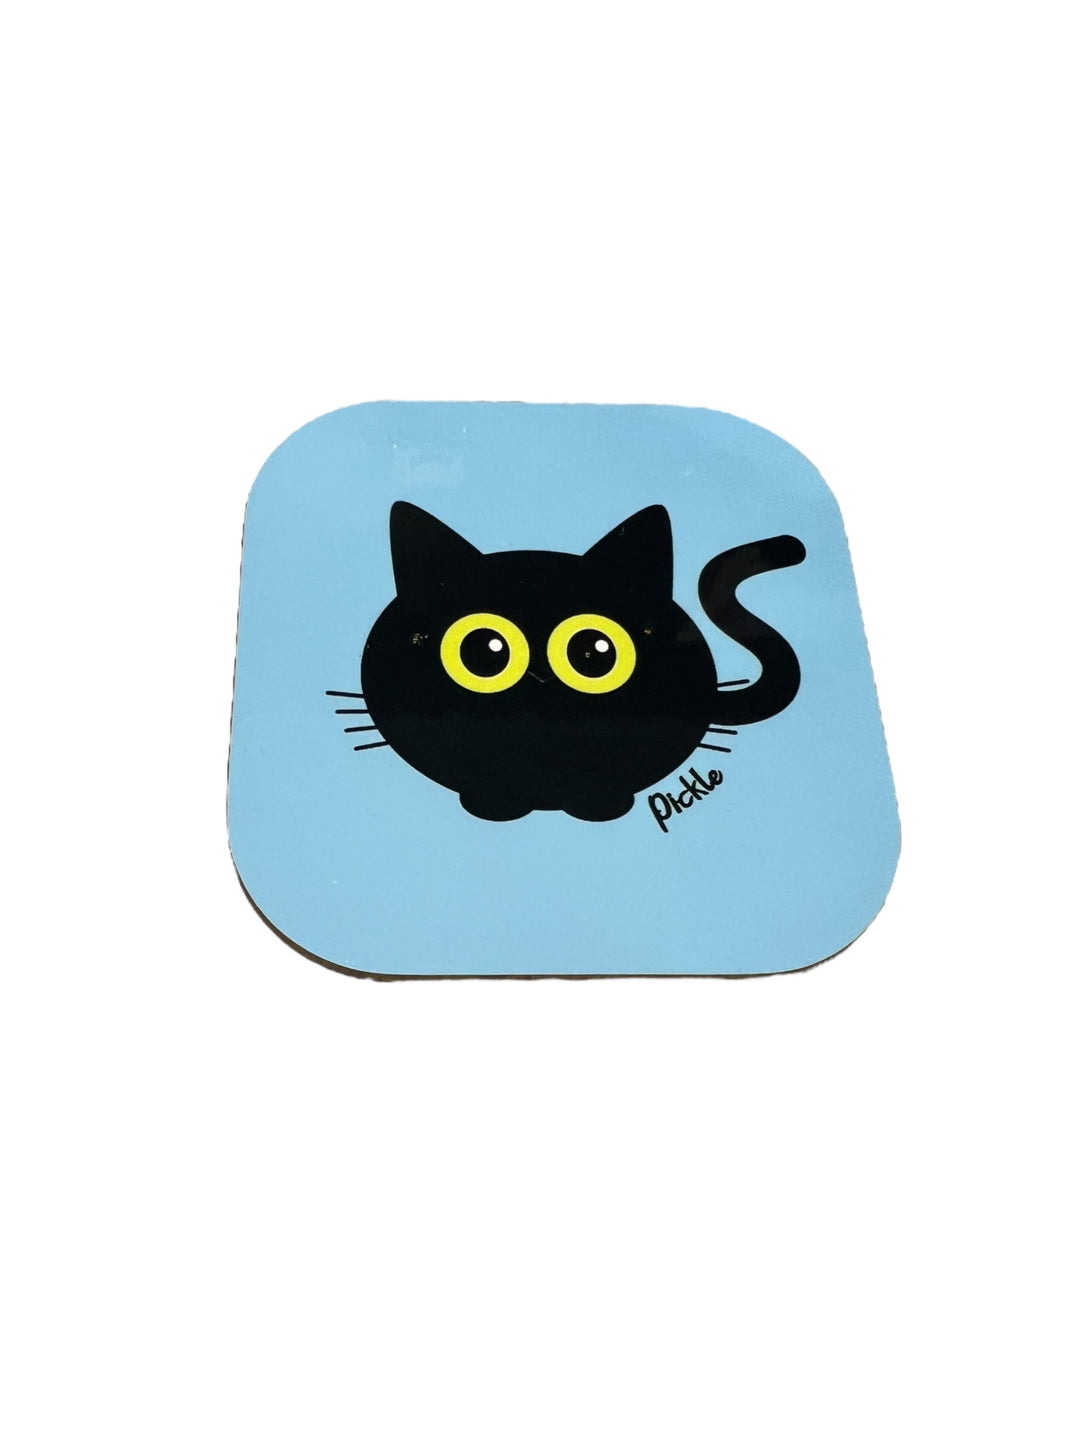 The Quirky Collection Animal Coasters